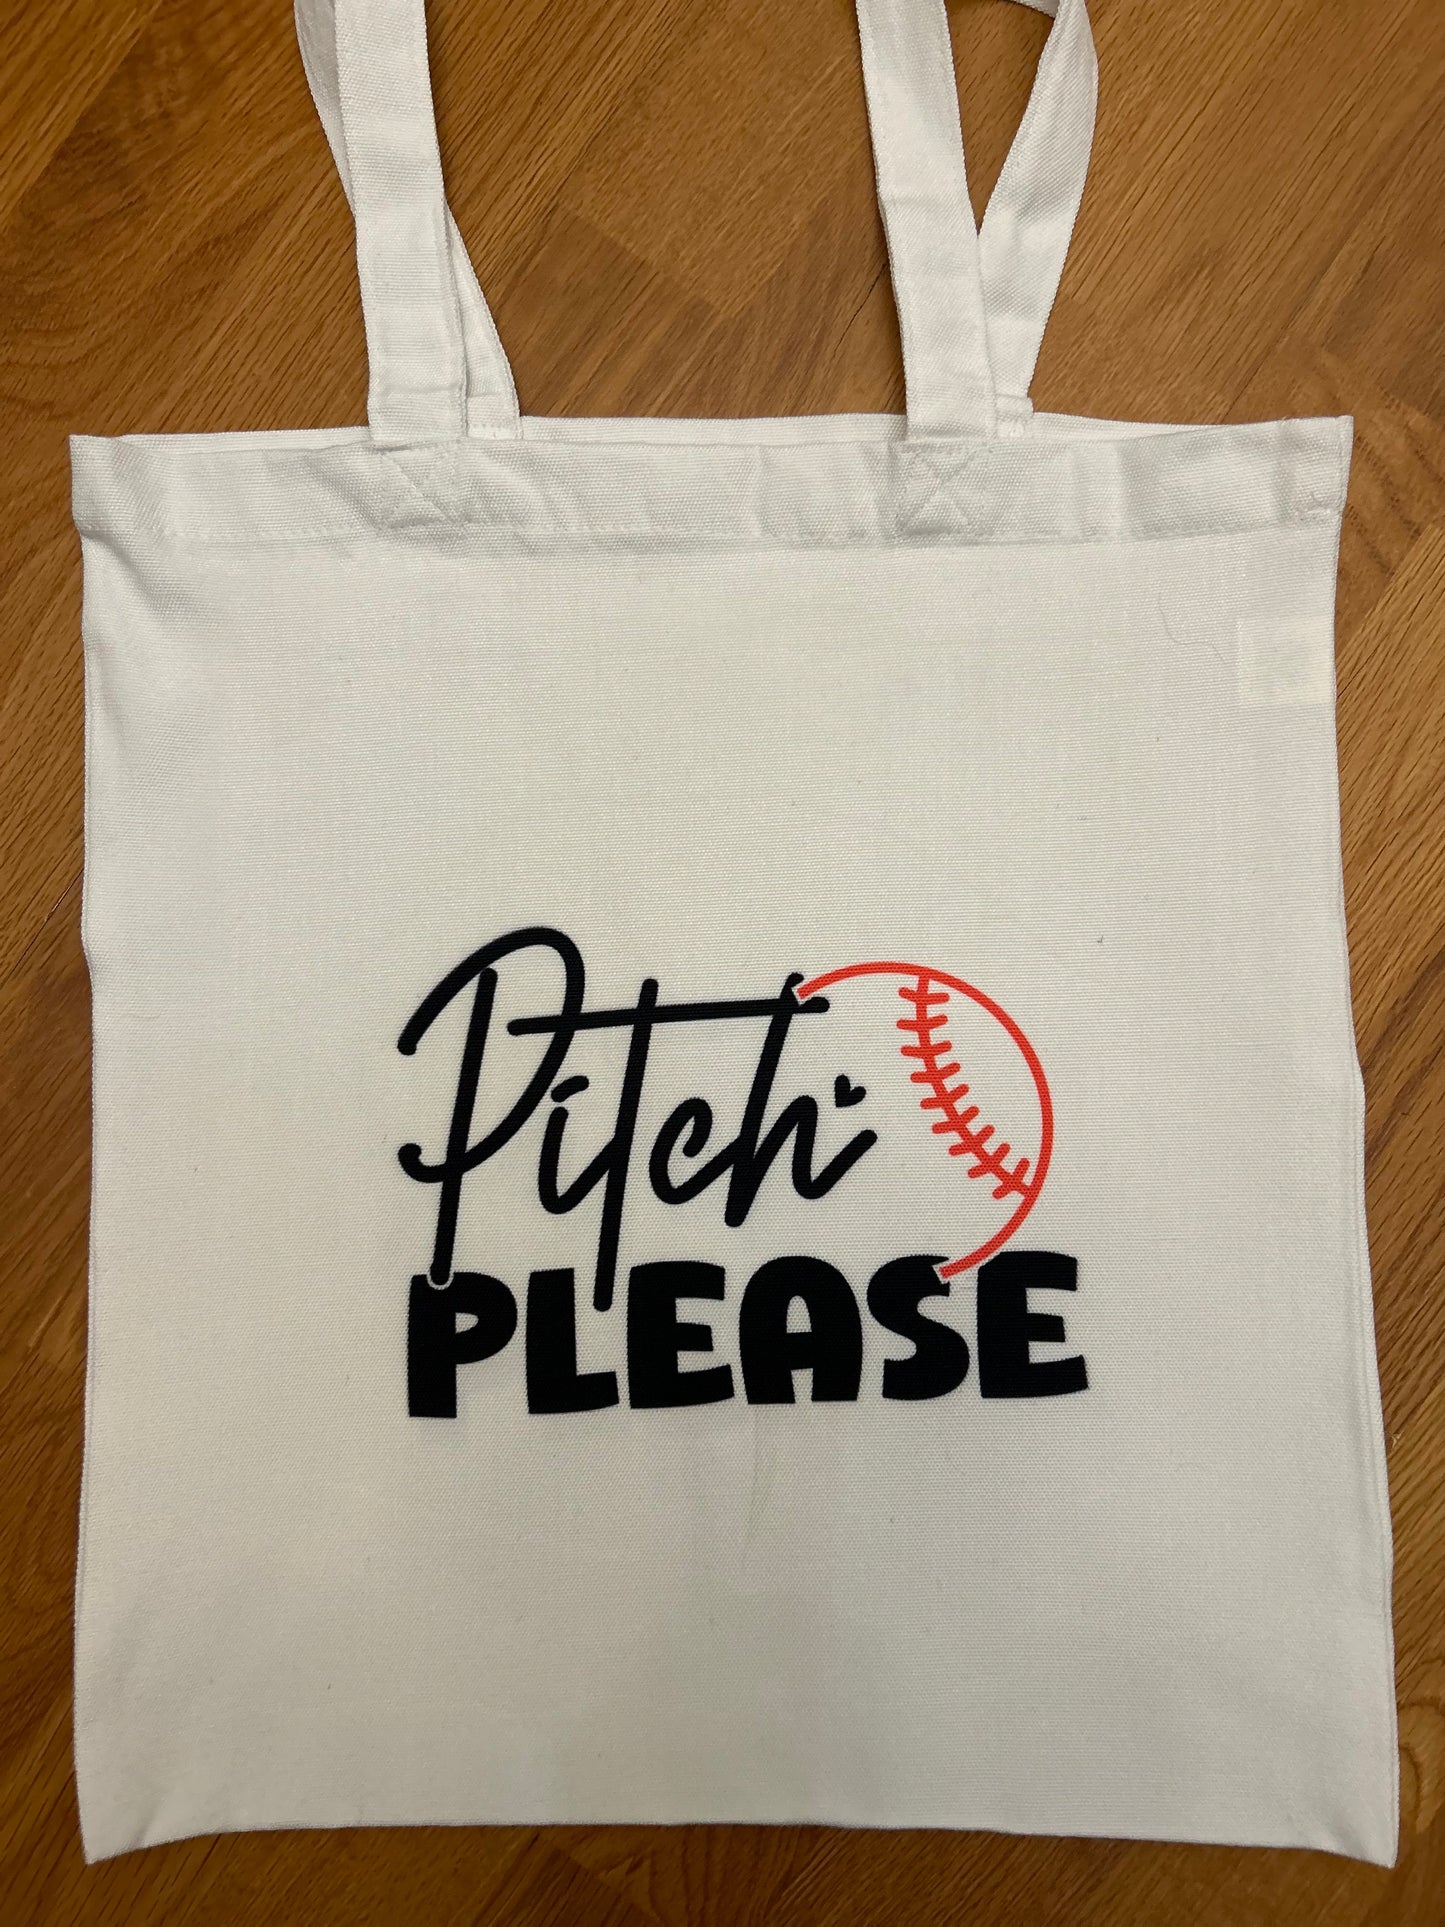 “Pitch Please” Tote